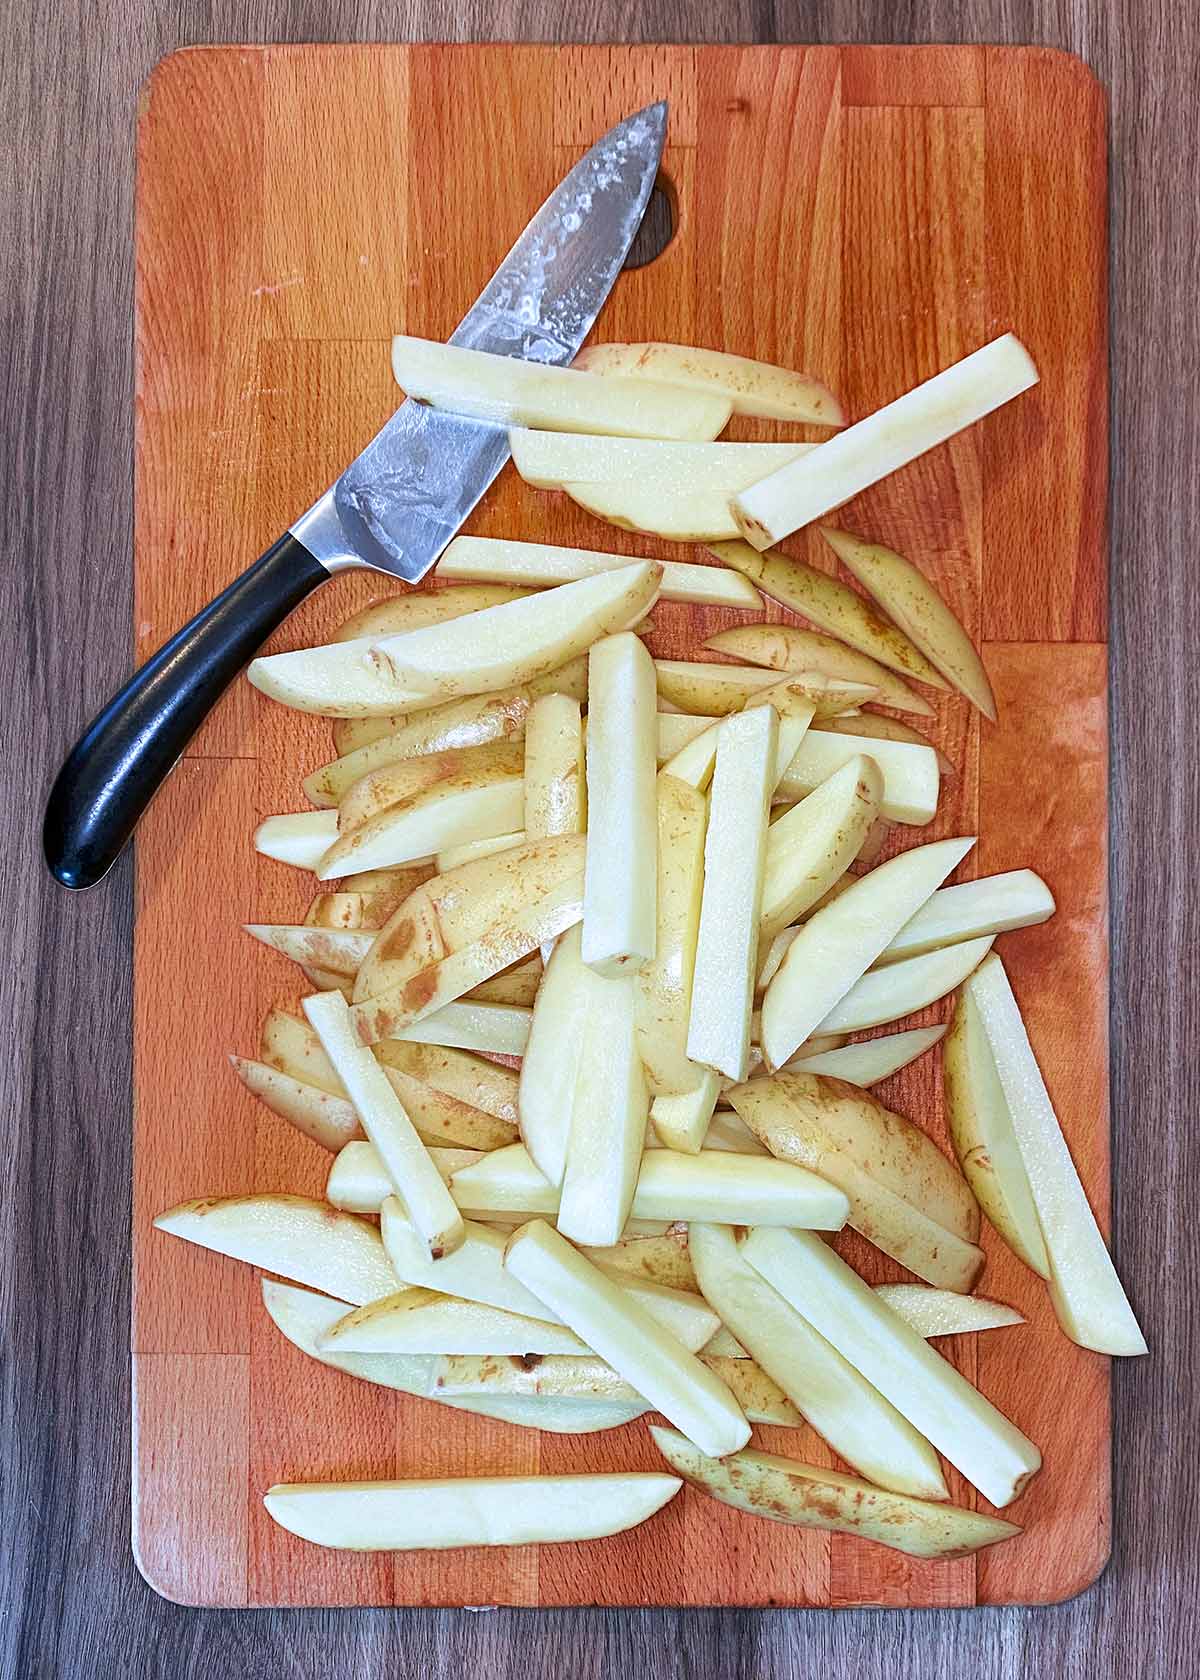 A chopping board with potatoes cut into chips.